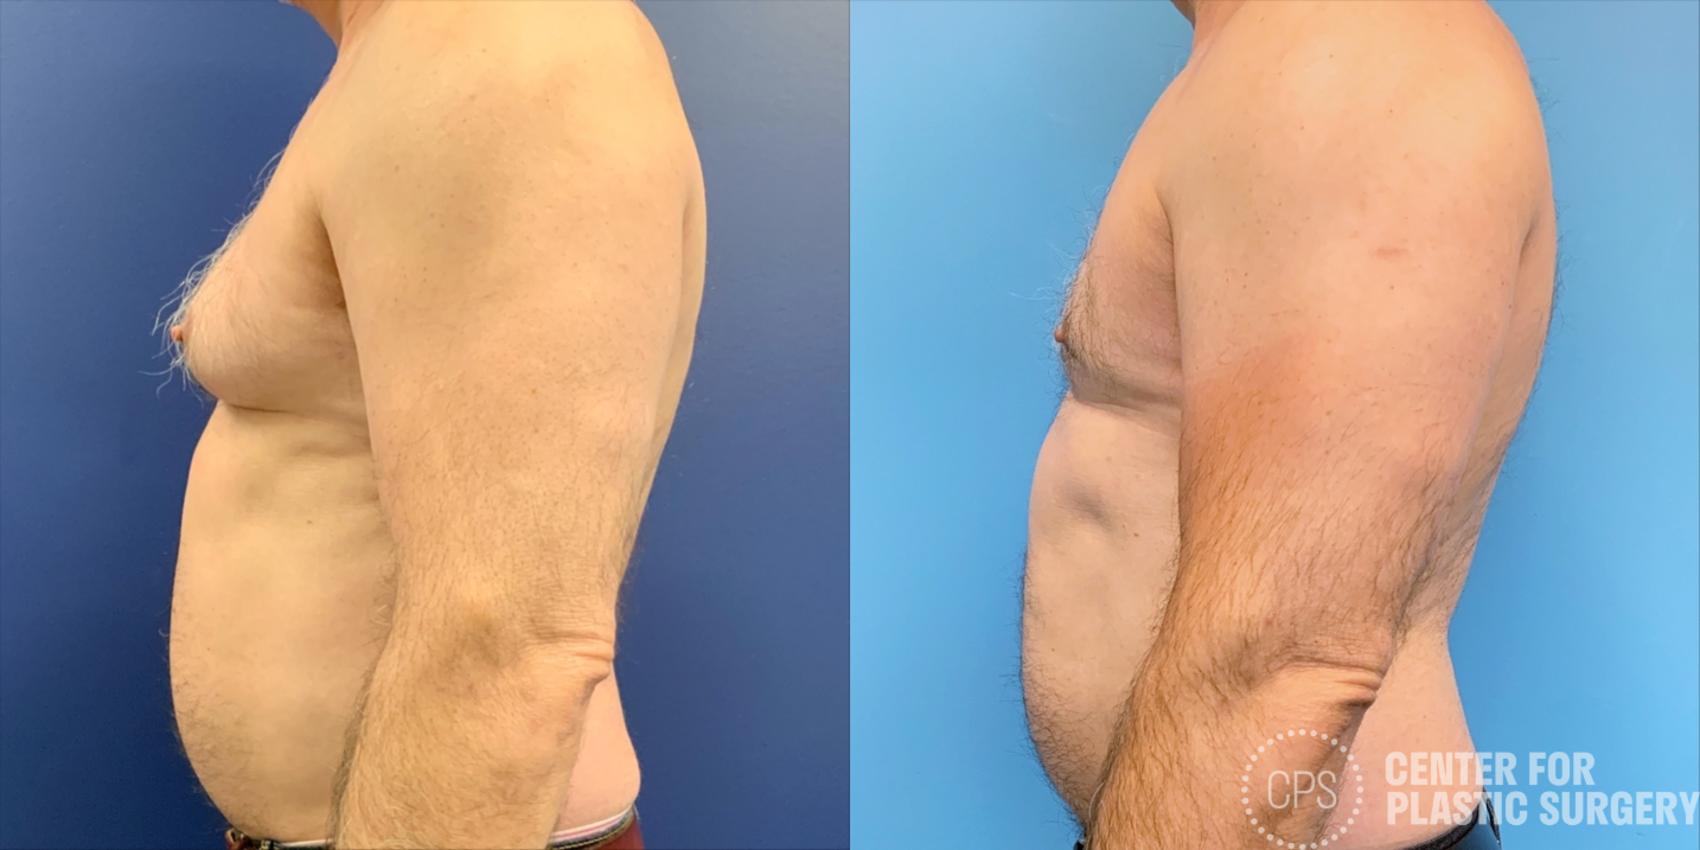 Male Breast Reduction / Gynecomastia Case 200 Before & After Right Side | Chevy Chase & Annandale, Washington D.C. Metropolitan Area | Center for Plastic Surgery